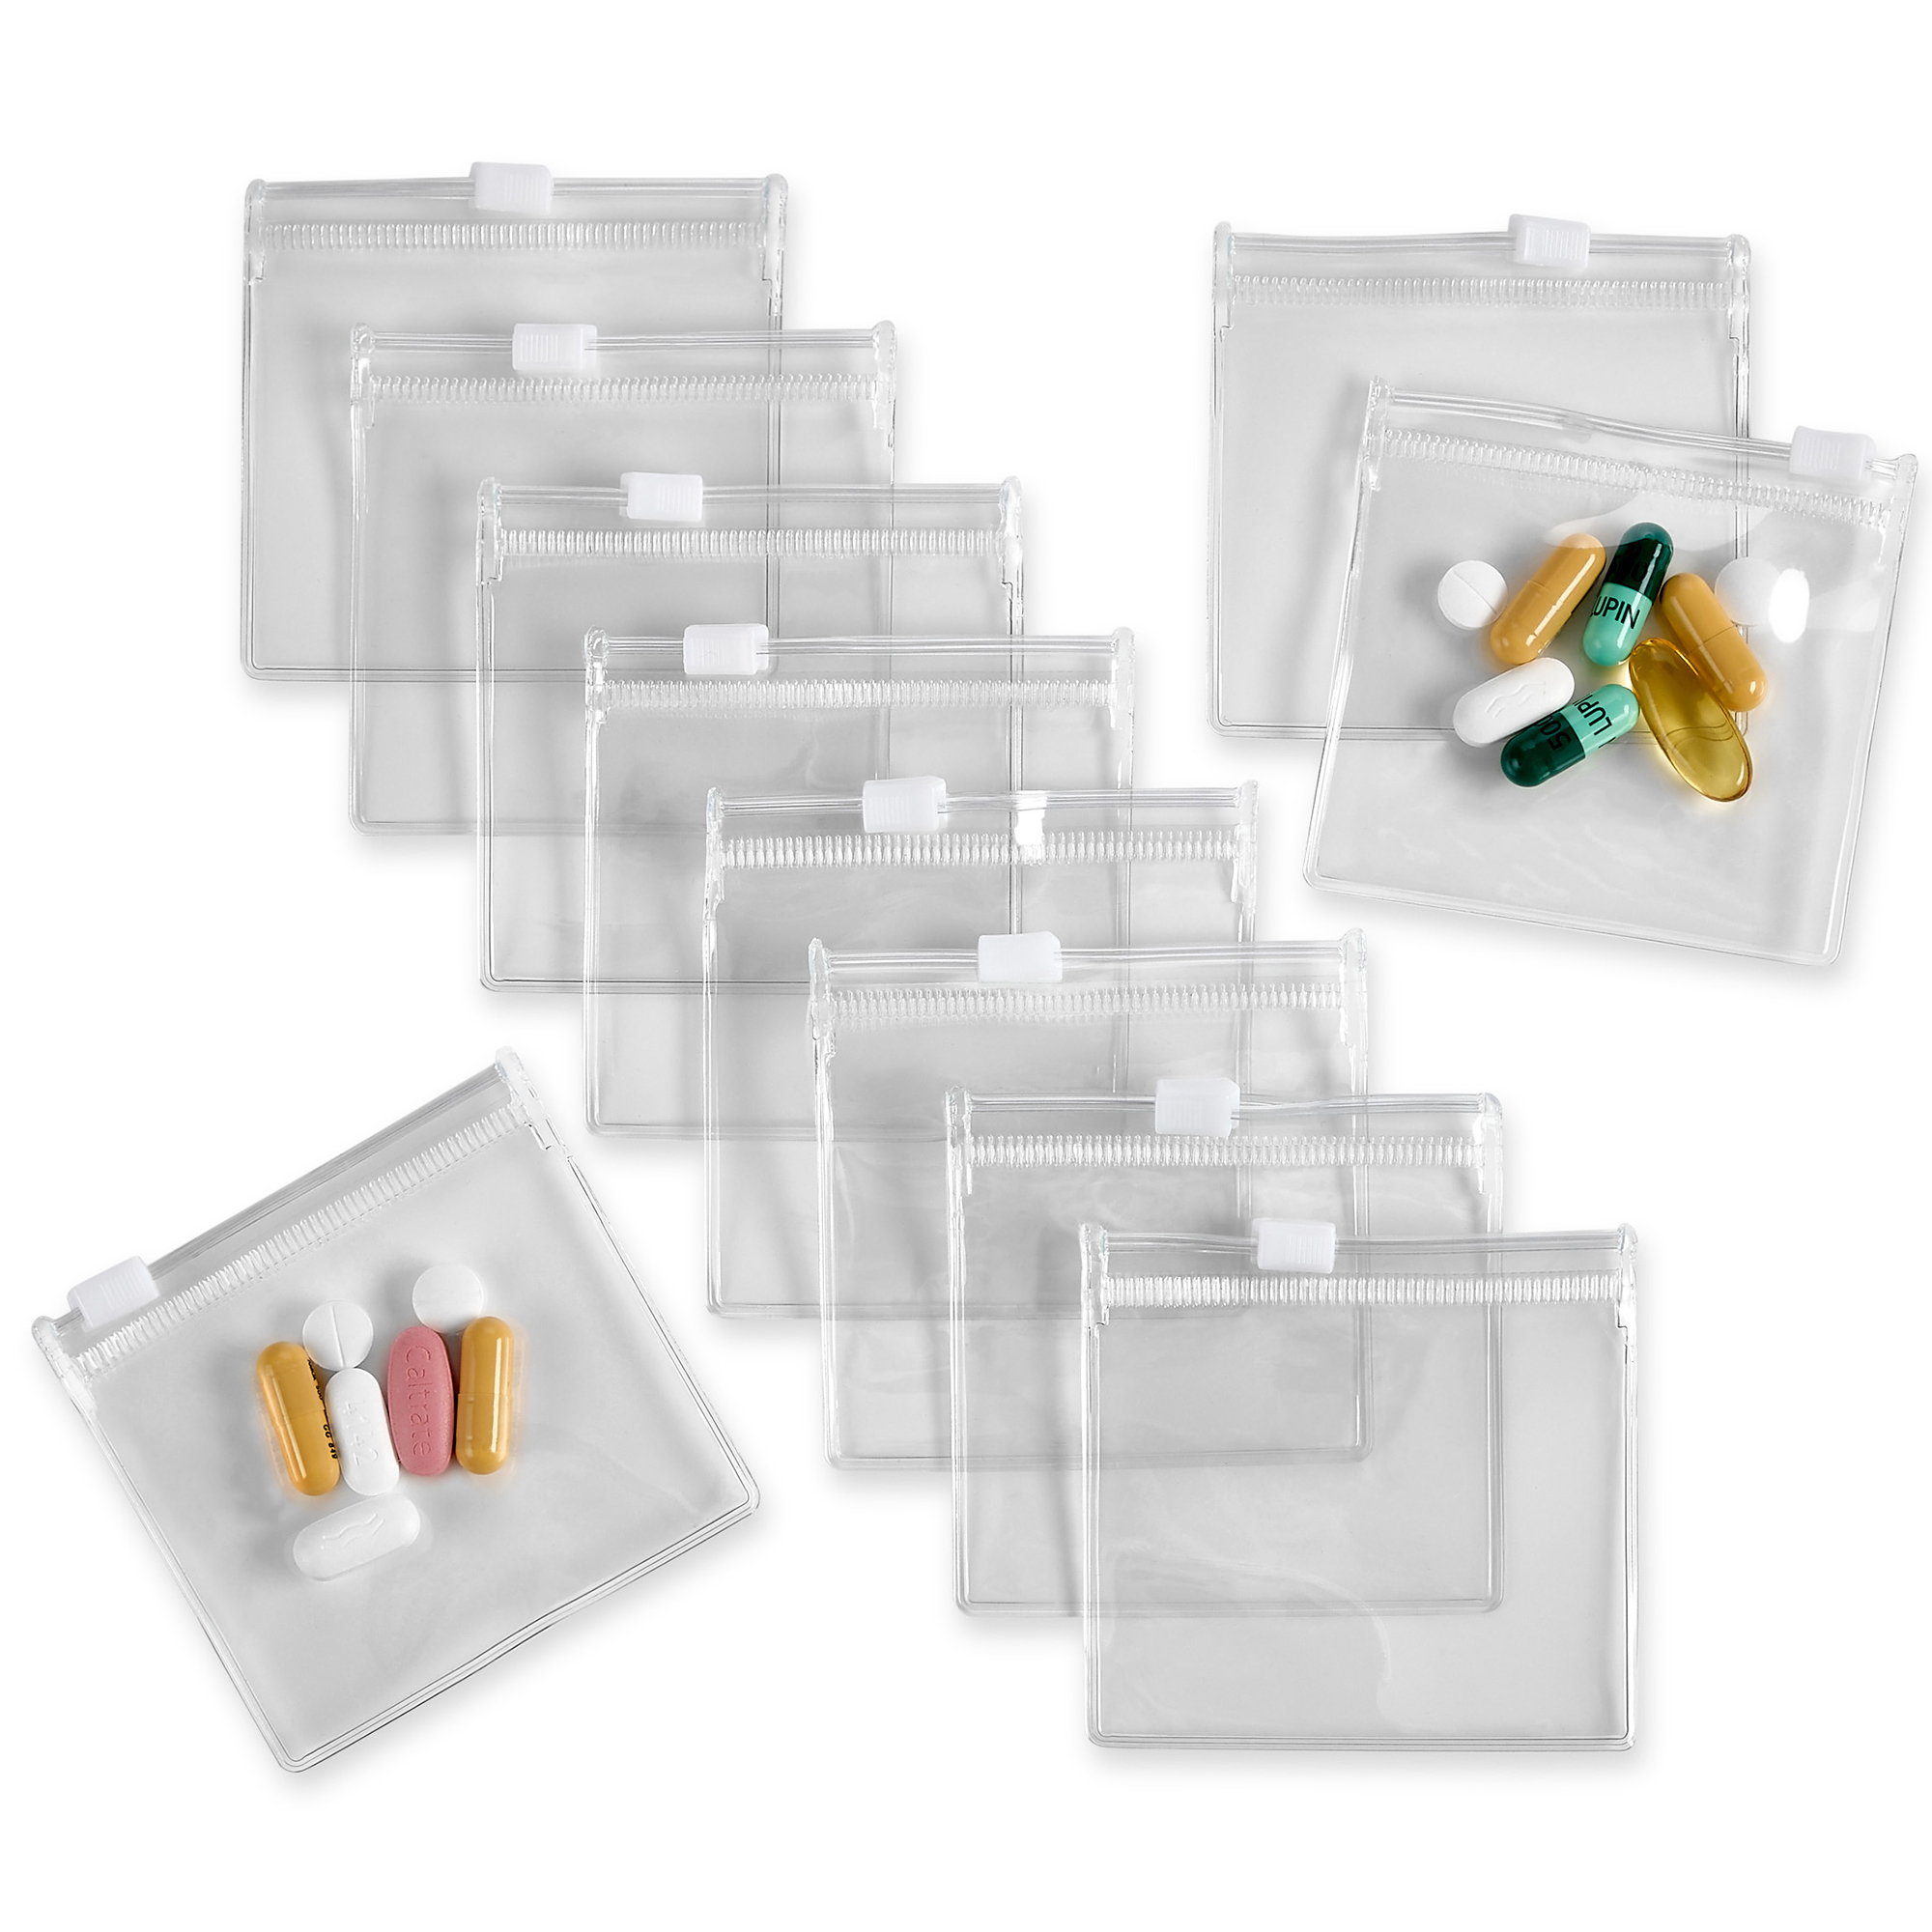 Zippered Pill Pouch Bags – 24 Pcs, Slide Lock Clear Plastic Mini Bags,  BPA-Free for Pills Vitamins, Supplements, Medications, Jewelry, Crafts,  Small Objects – Self-Sealing, Reusable, Travel-Friendly